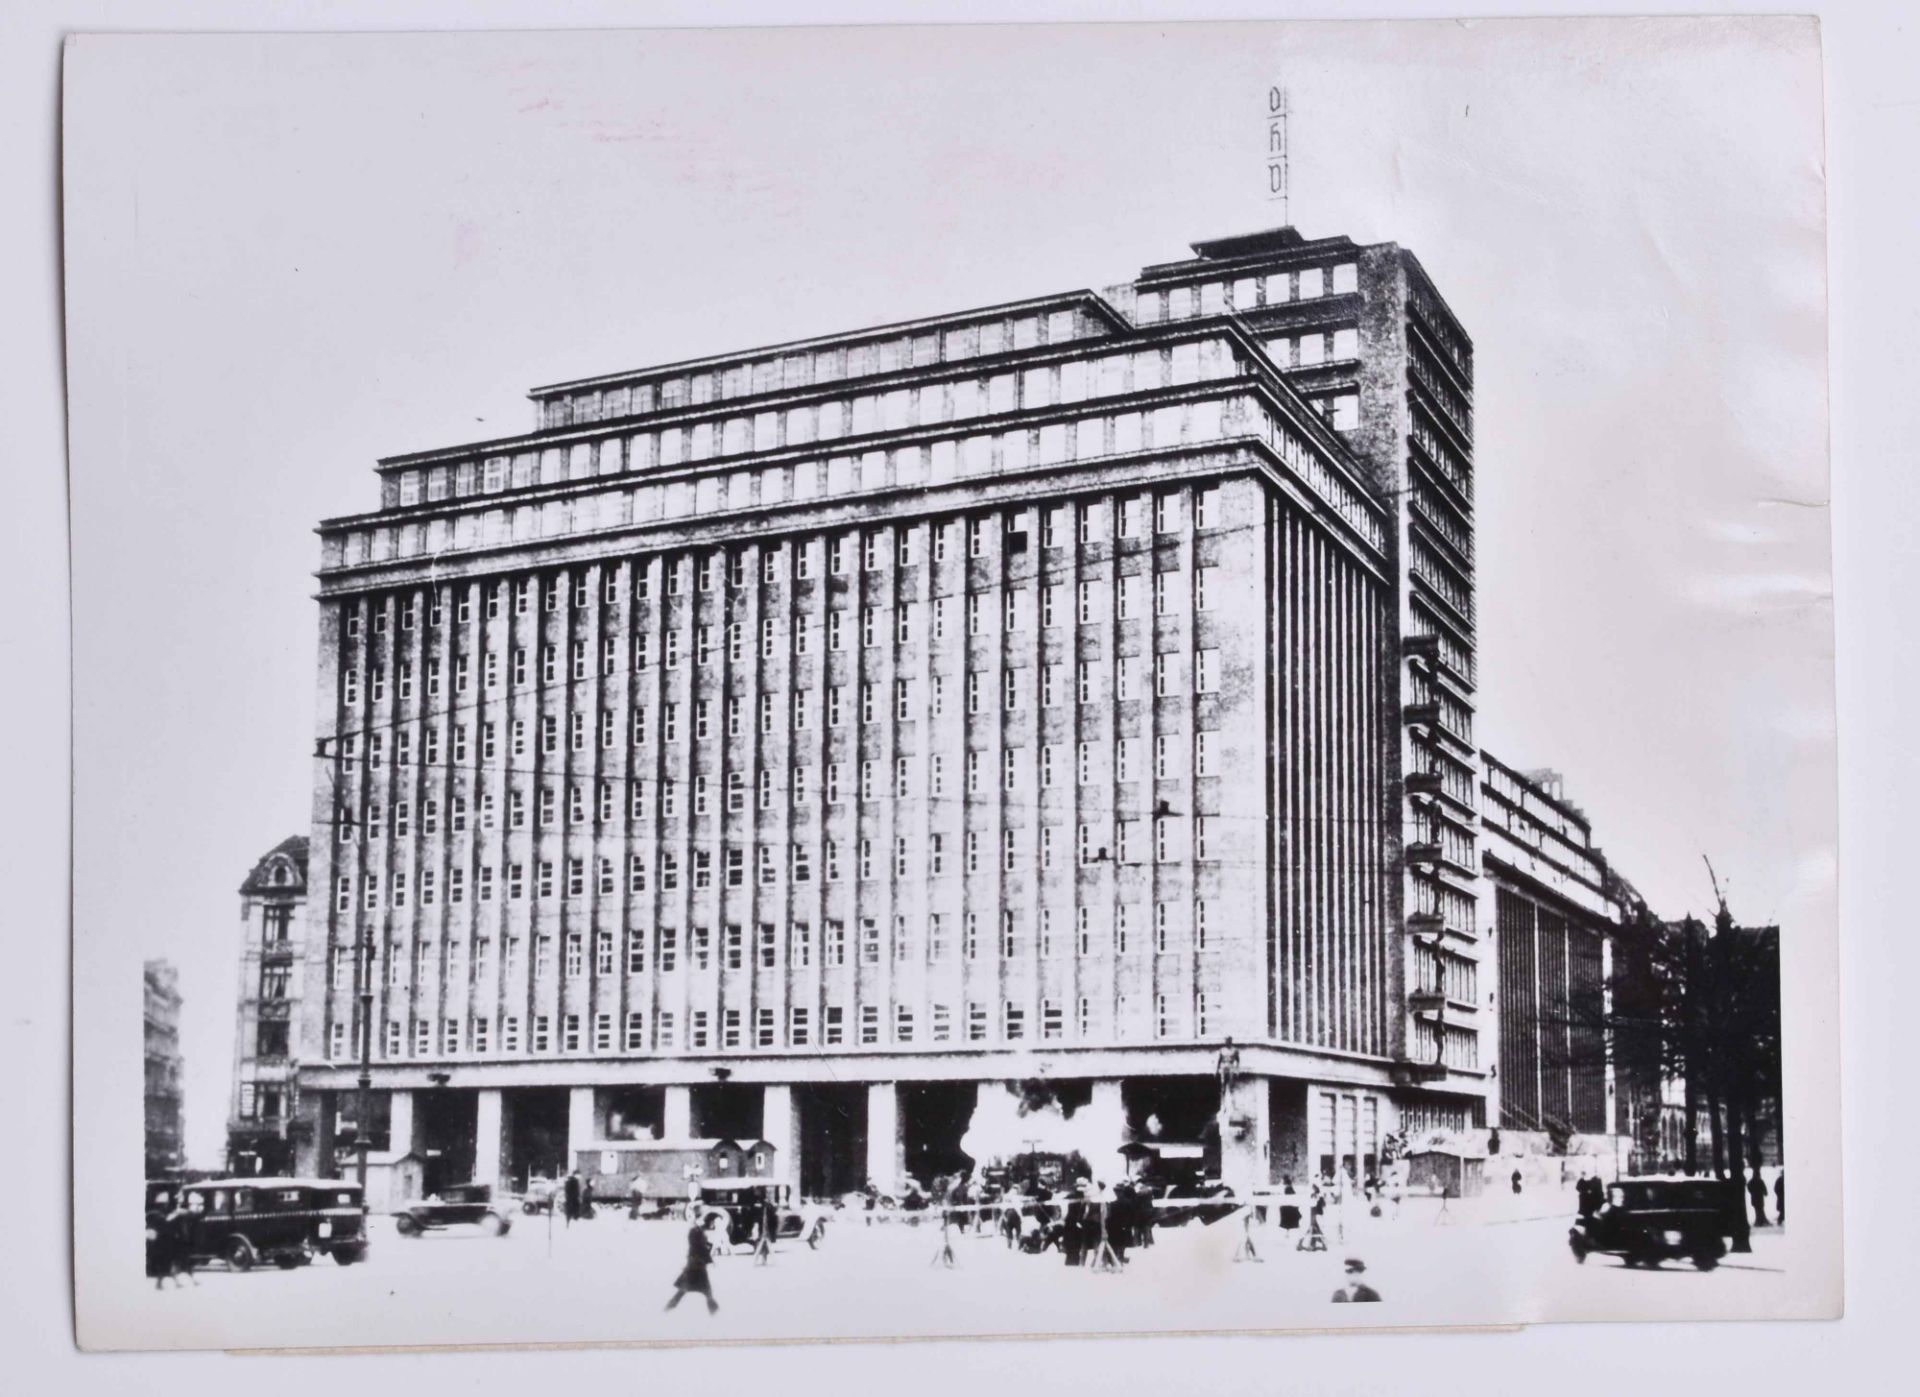 Collection of architecture photos from the 1920s/30s - Image 6 of 7